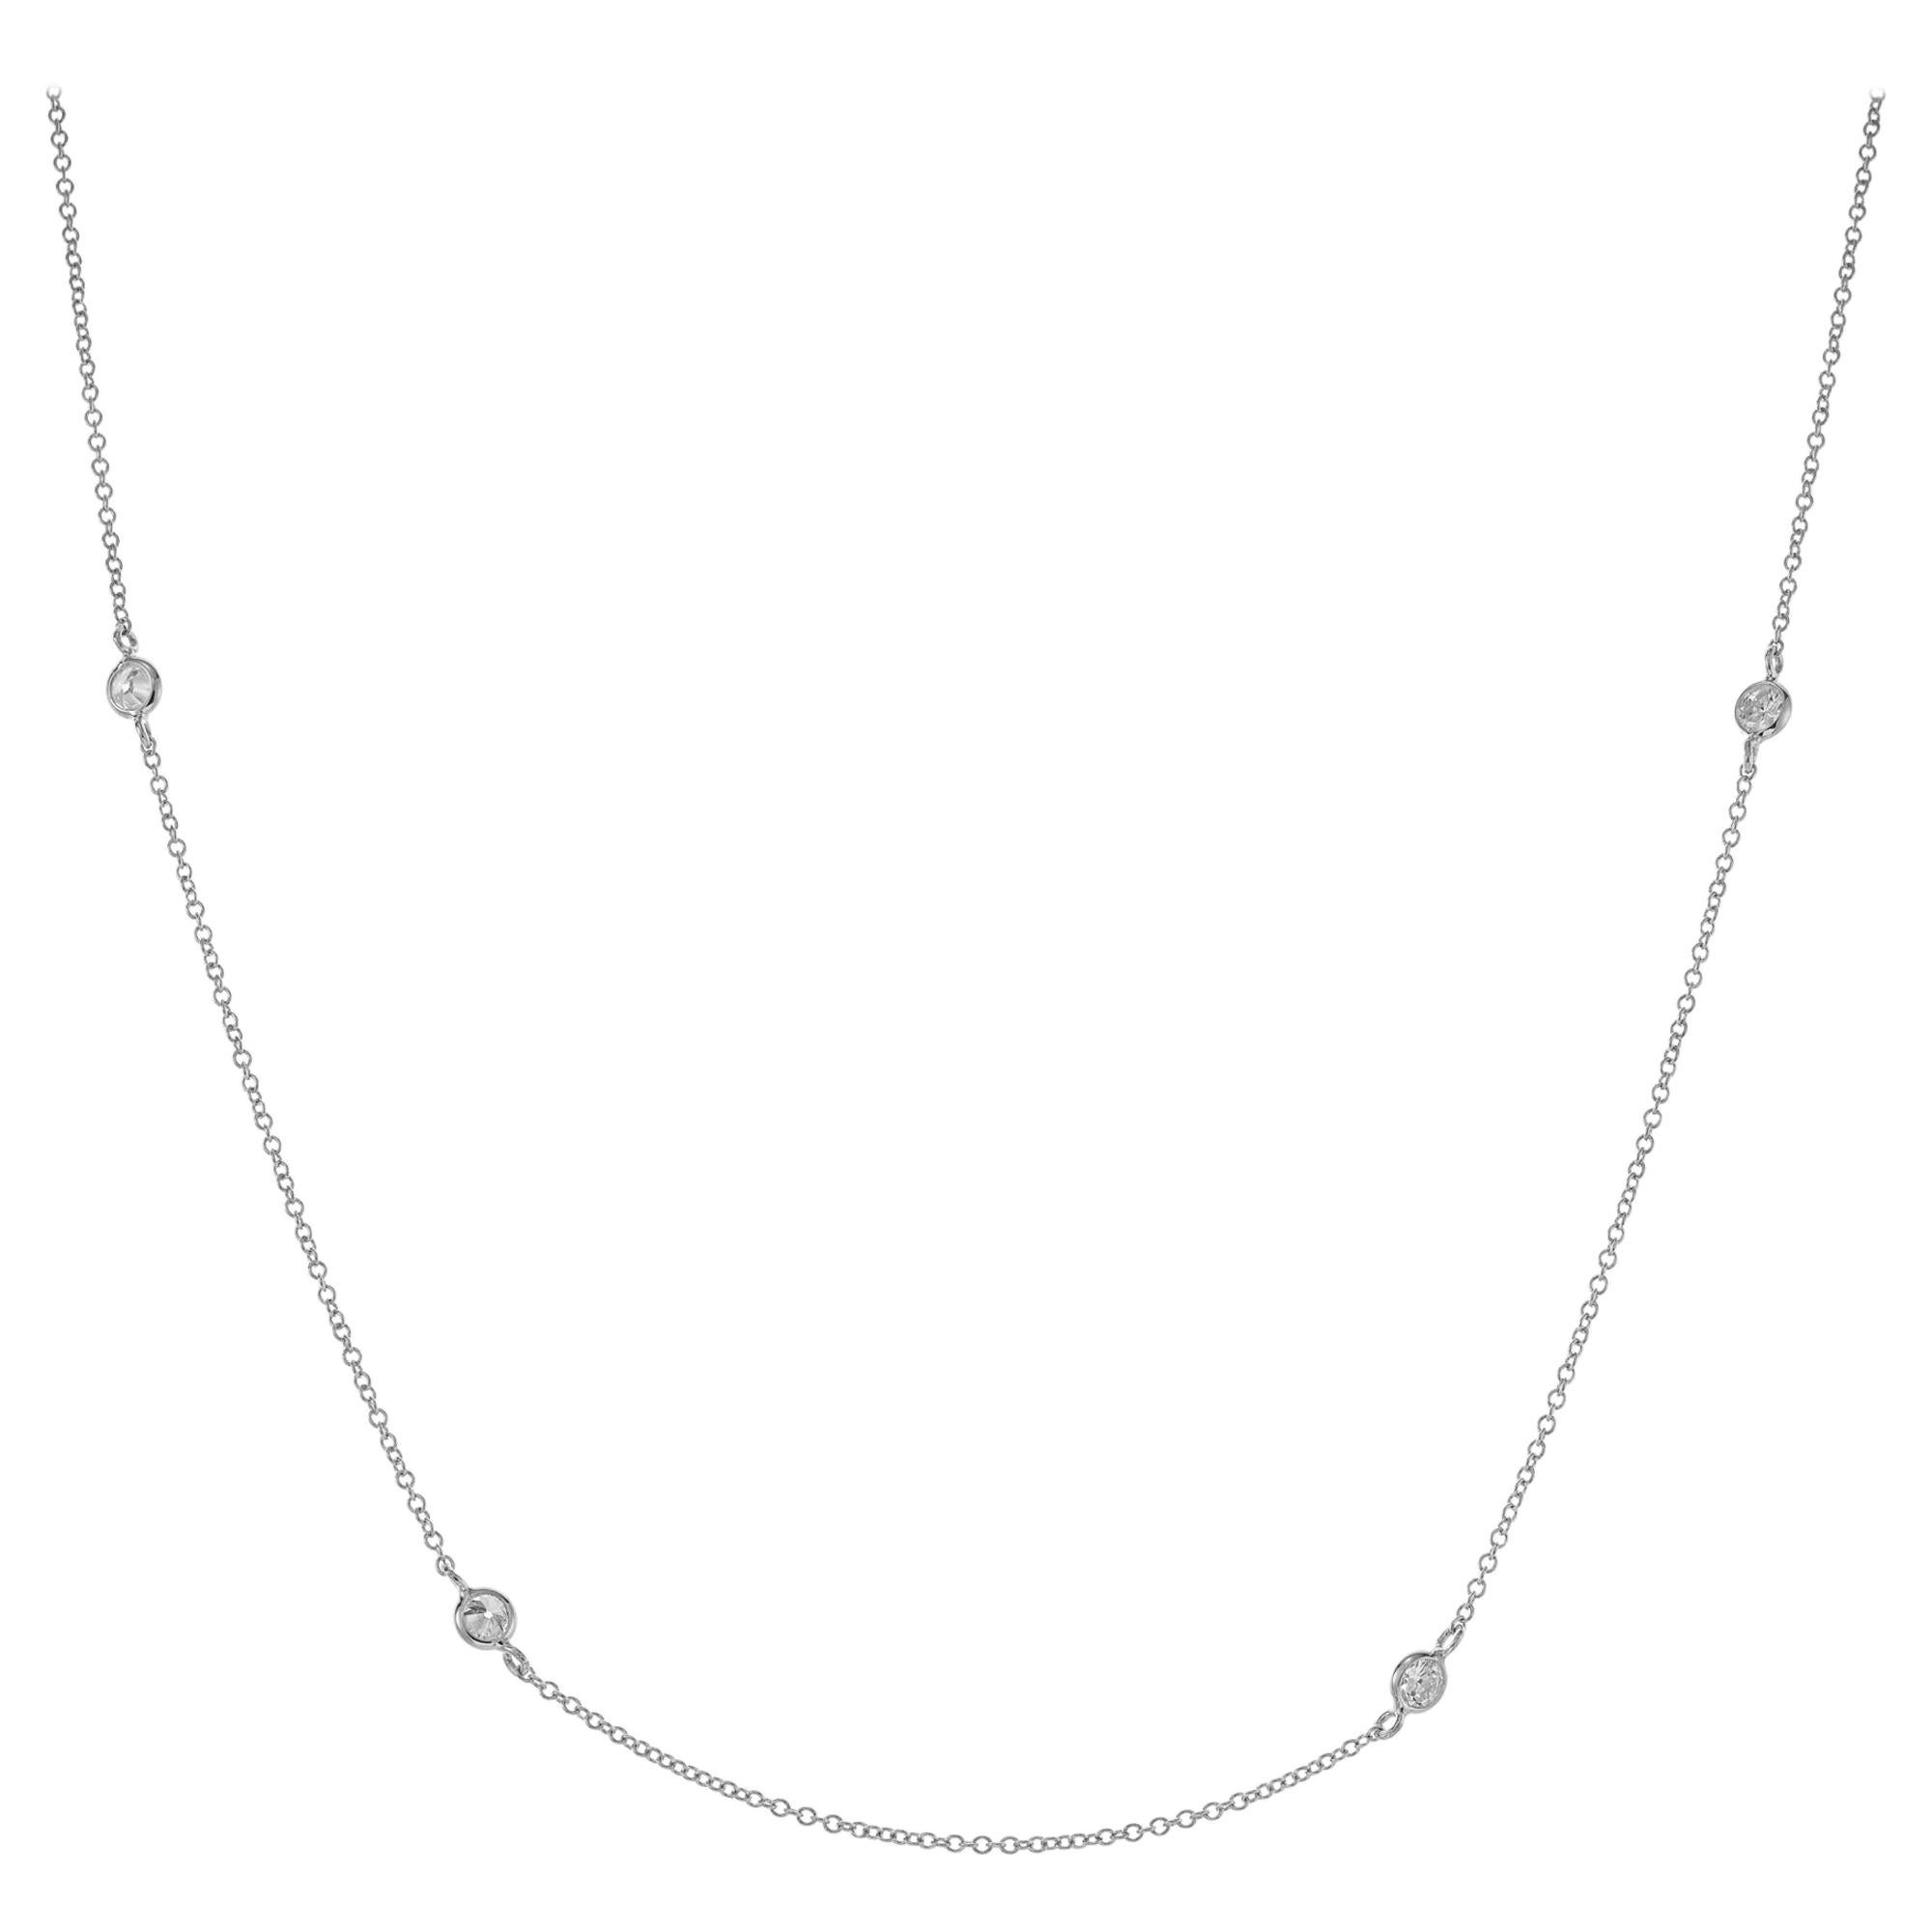 Peter Suchy .40 Carat Diamond White Gold Diamond by the Yard Necklace For Sale